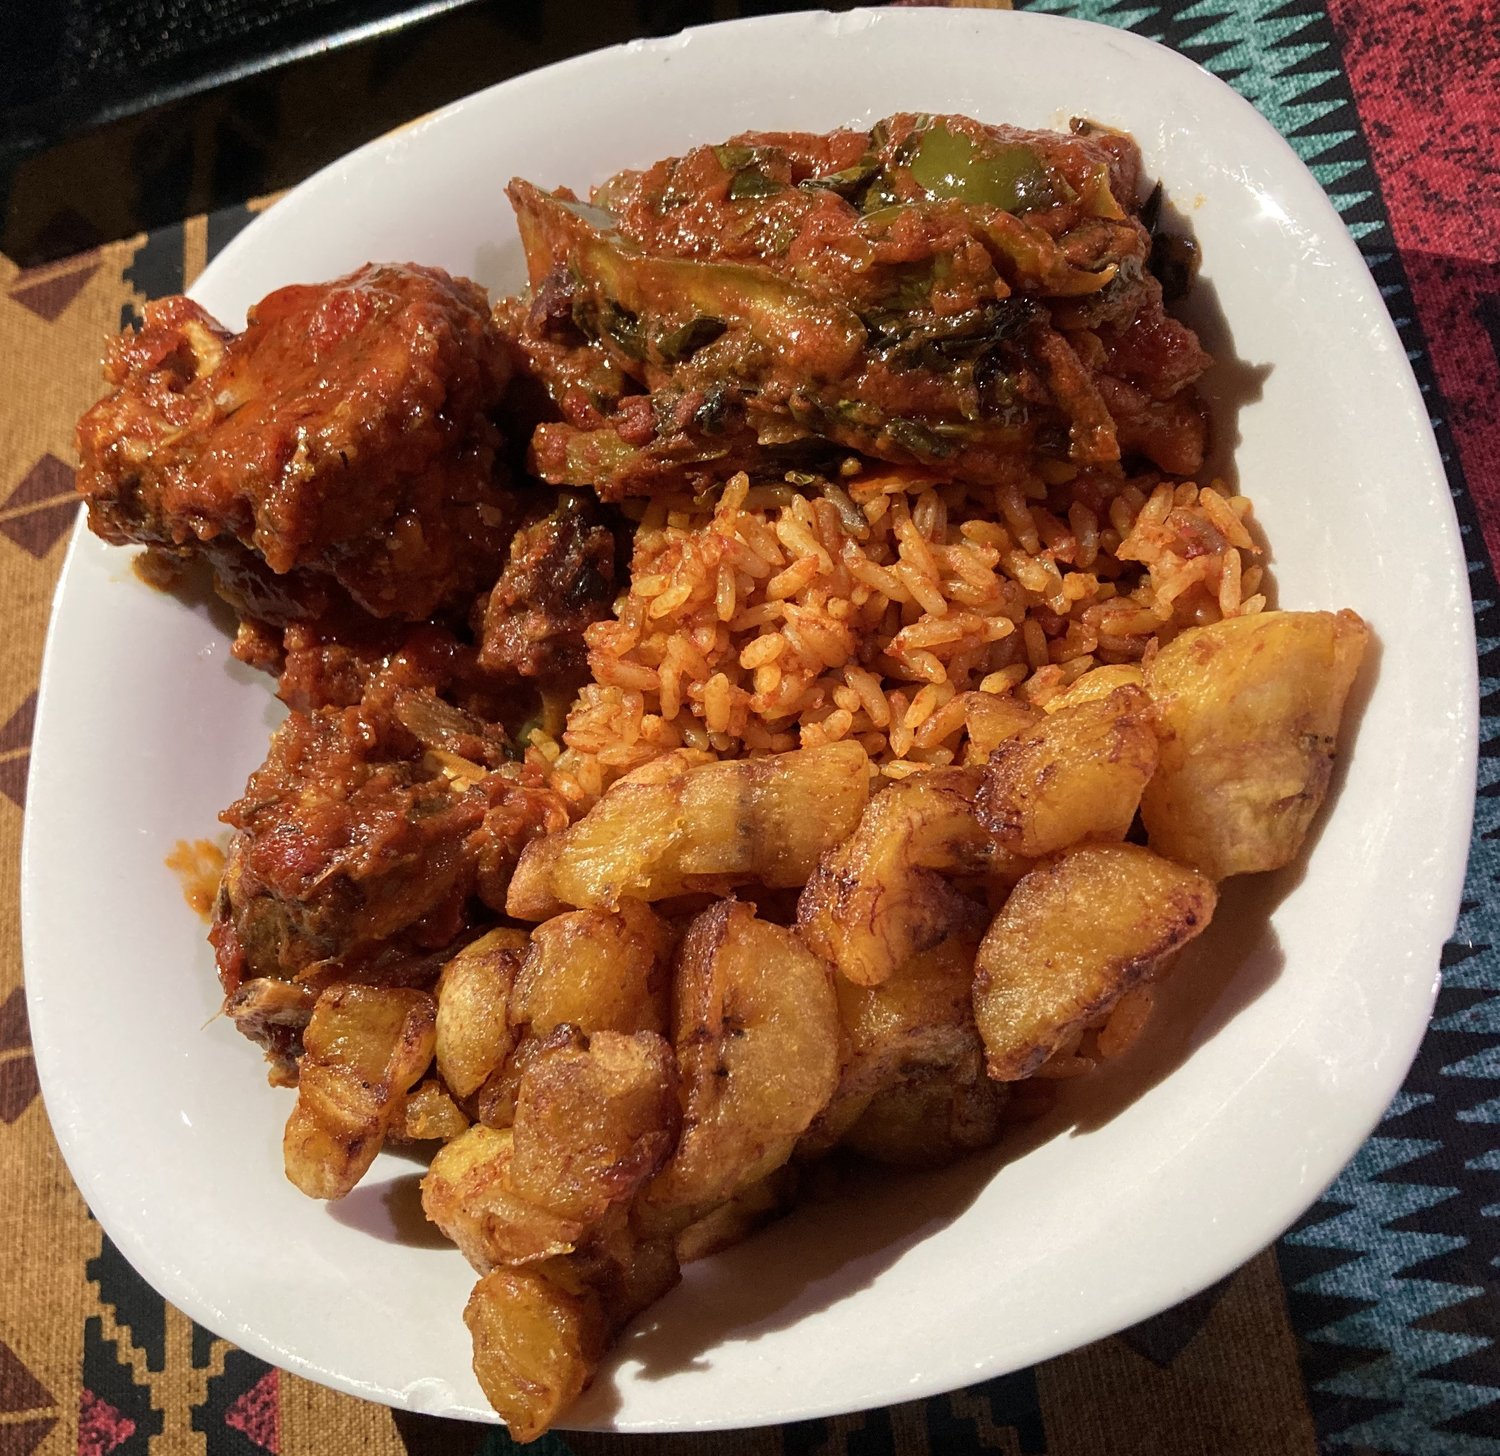 Tatse’s goat bowl with jollof rice and fried plantains.